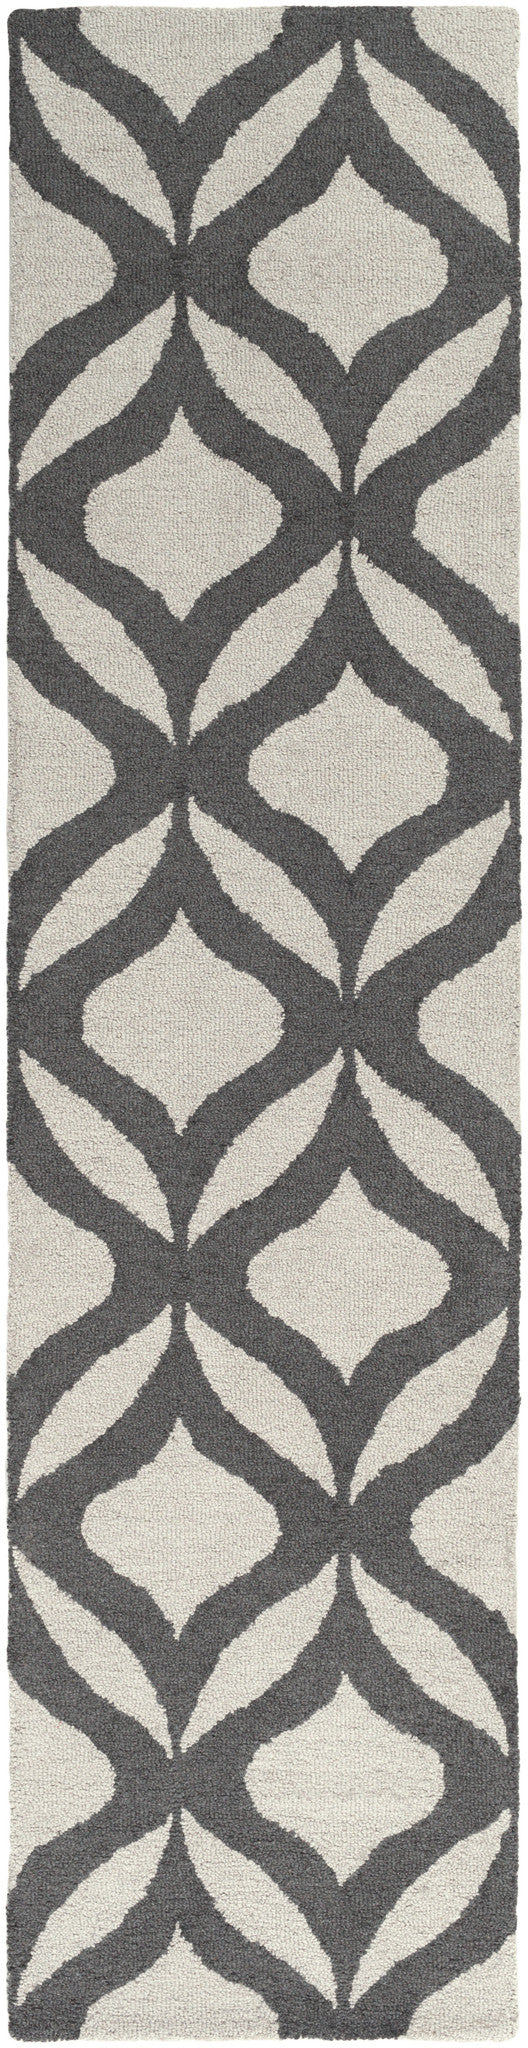 Artistic Weavers Impression Addy Charcoal/Ivory Area Rug Runner